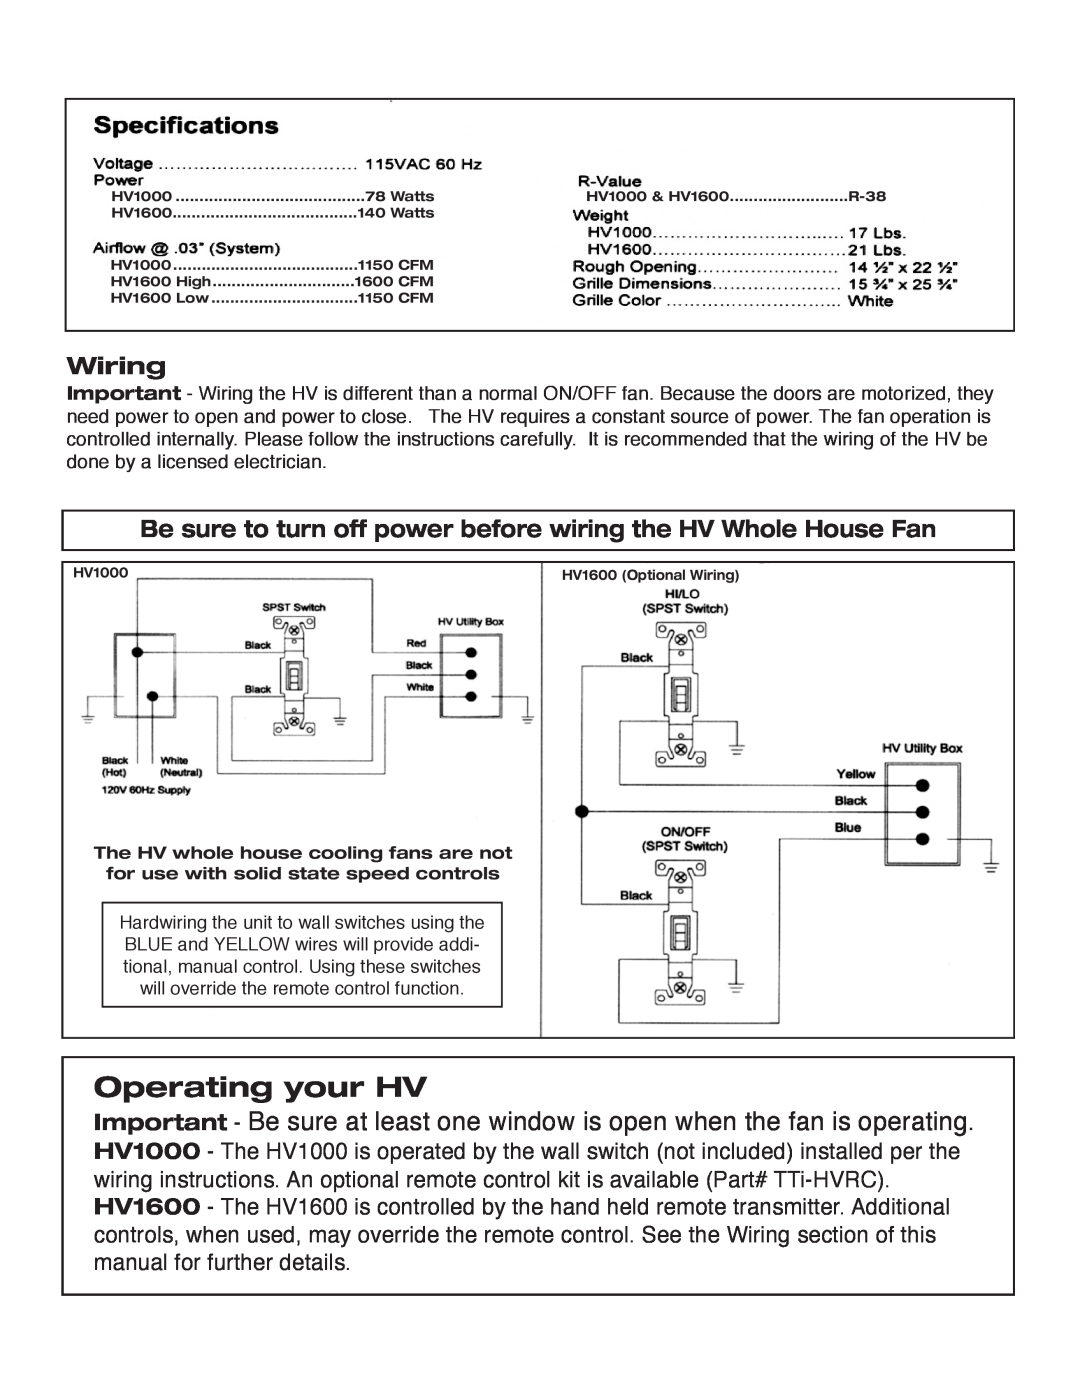 Tamarack Technologies HV1000 Wiring, Be sure to turn off power before wiring the HV Whole House Fan, Operating your HV 